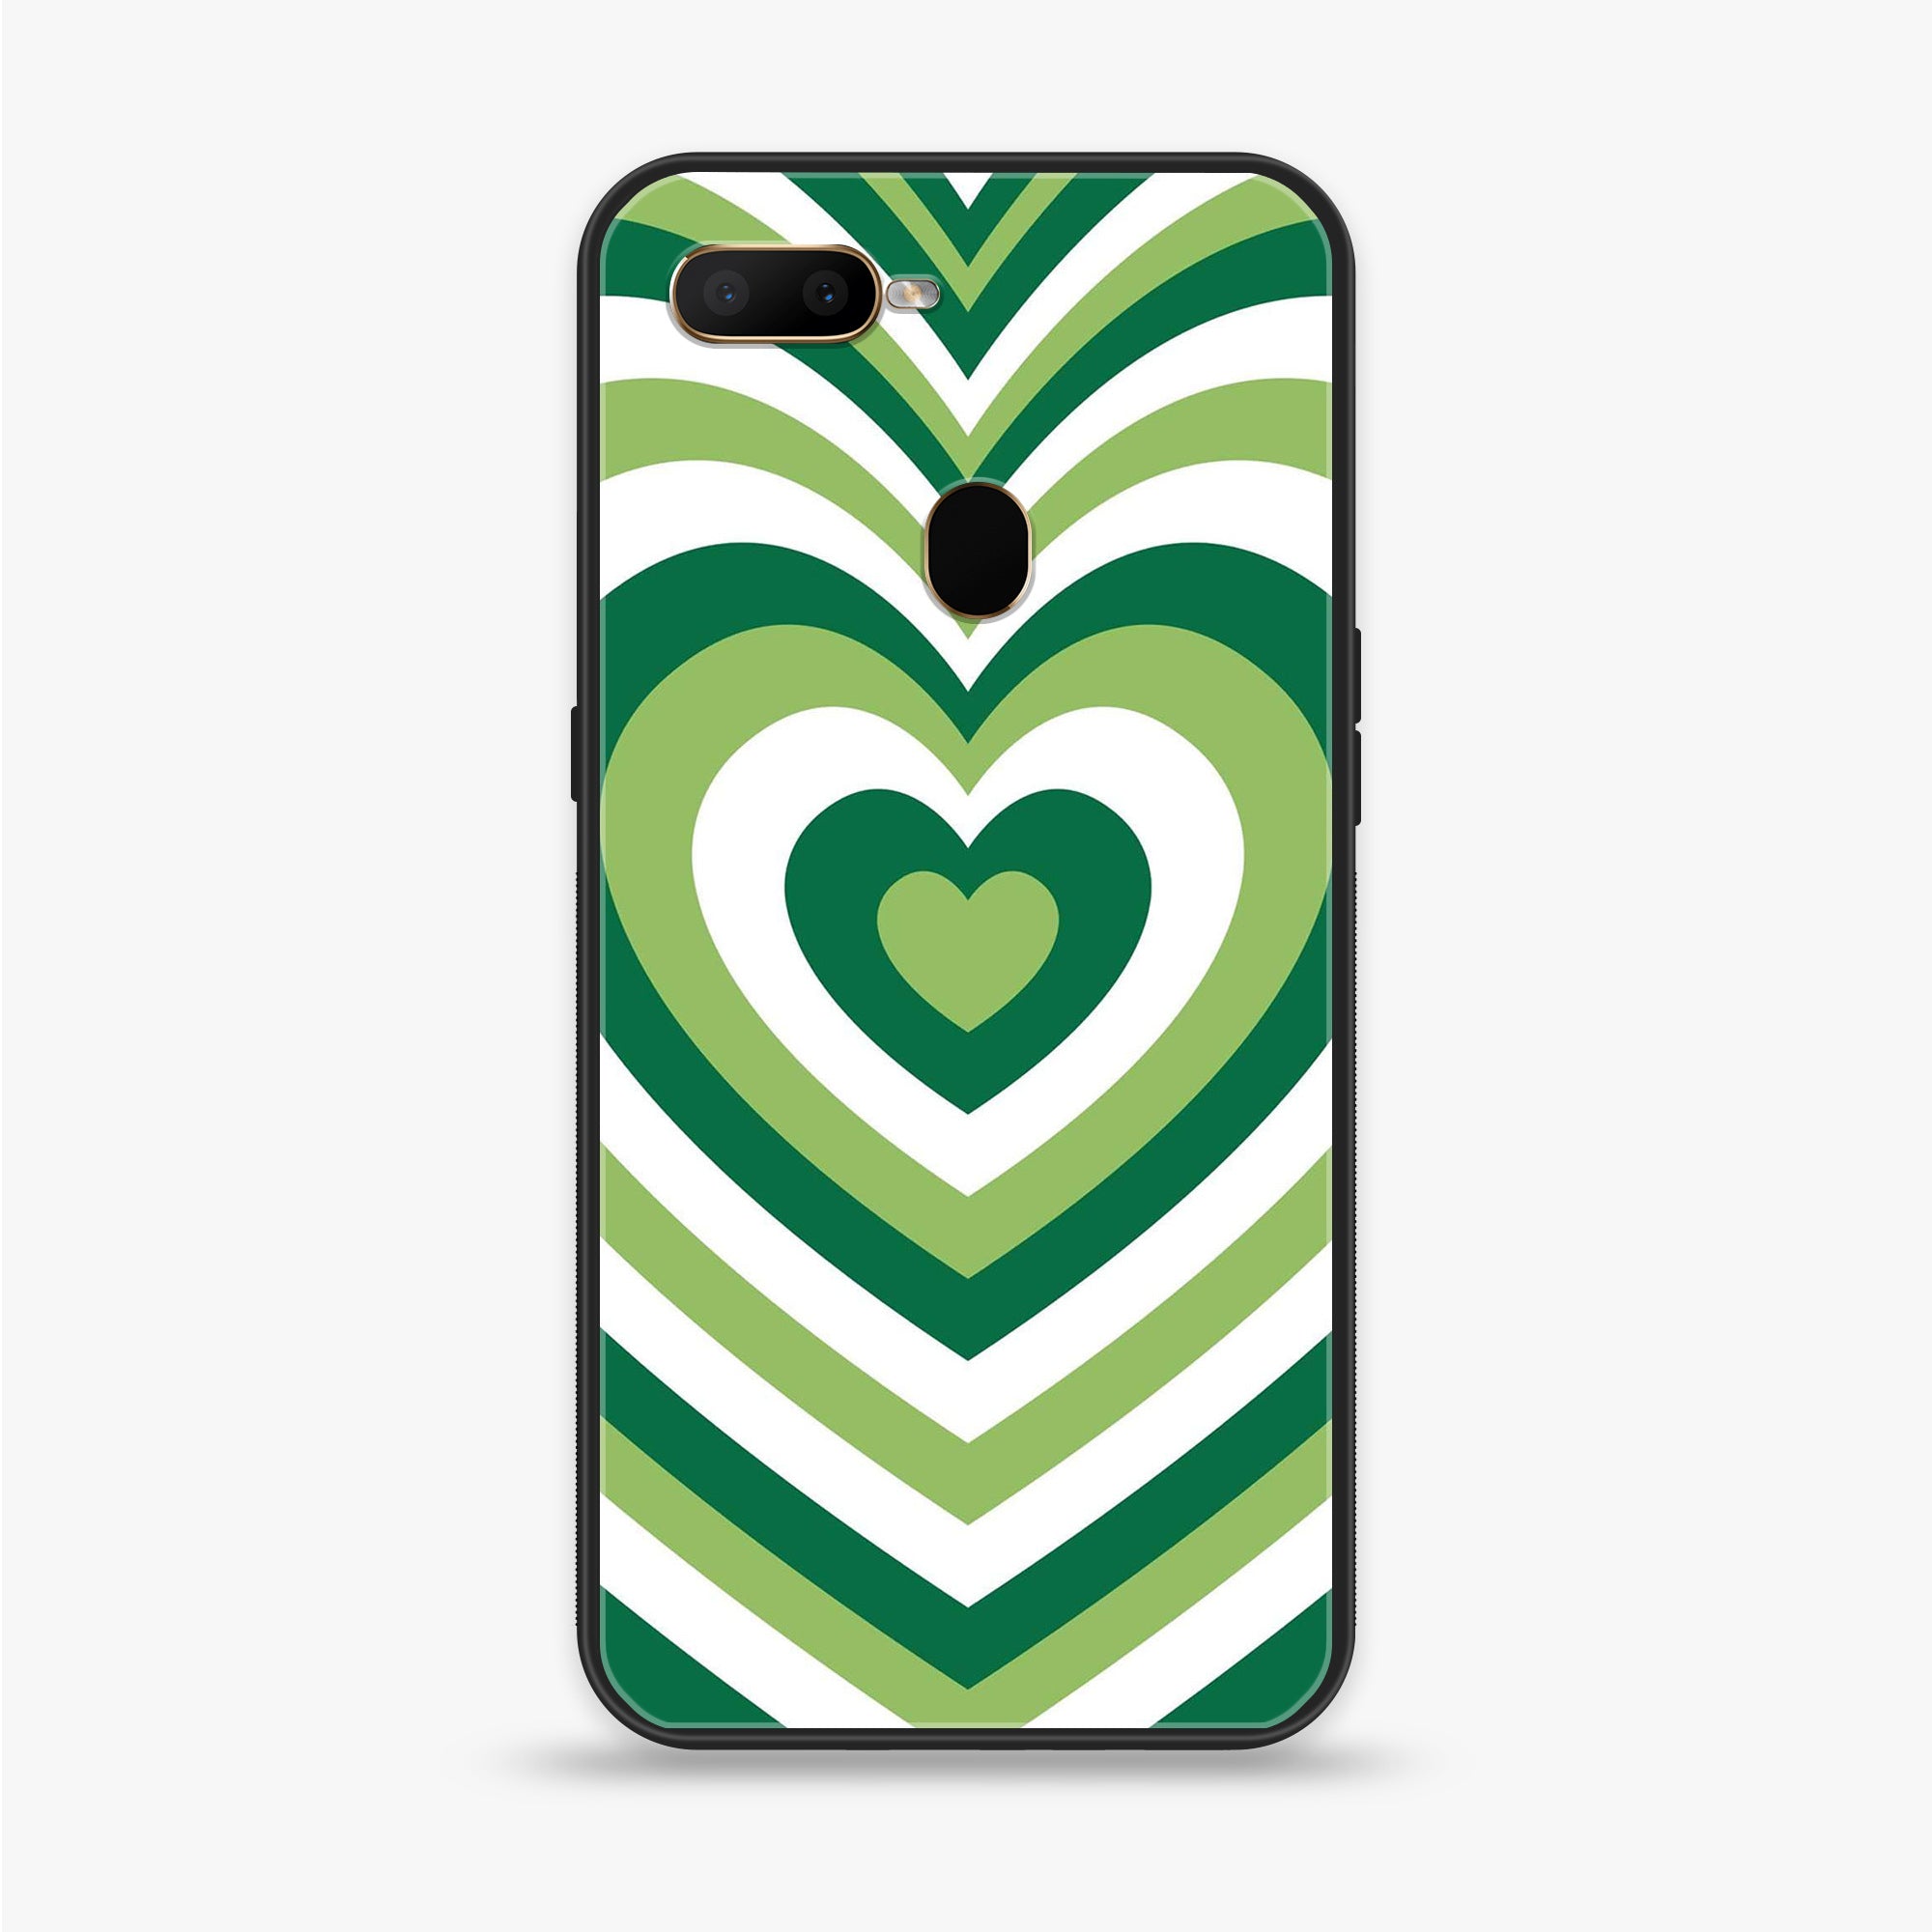 OPPO A5s - Heart Beat Series - Premium Printed Glass soft Bumper shock Proof Case